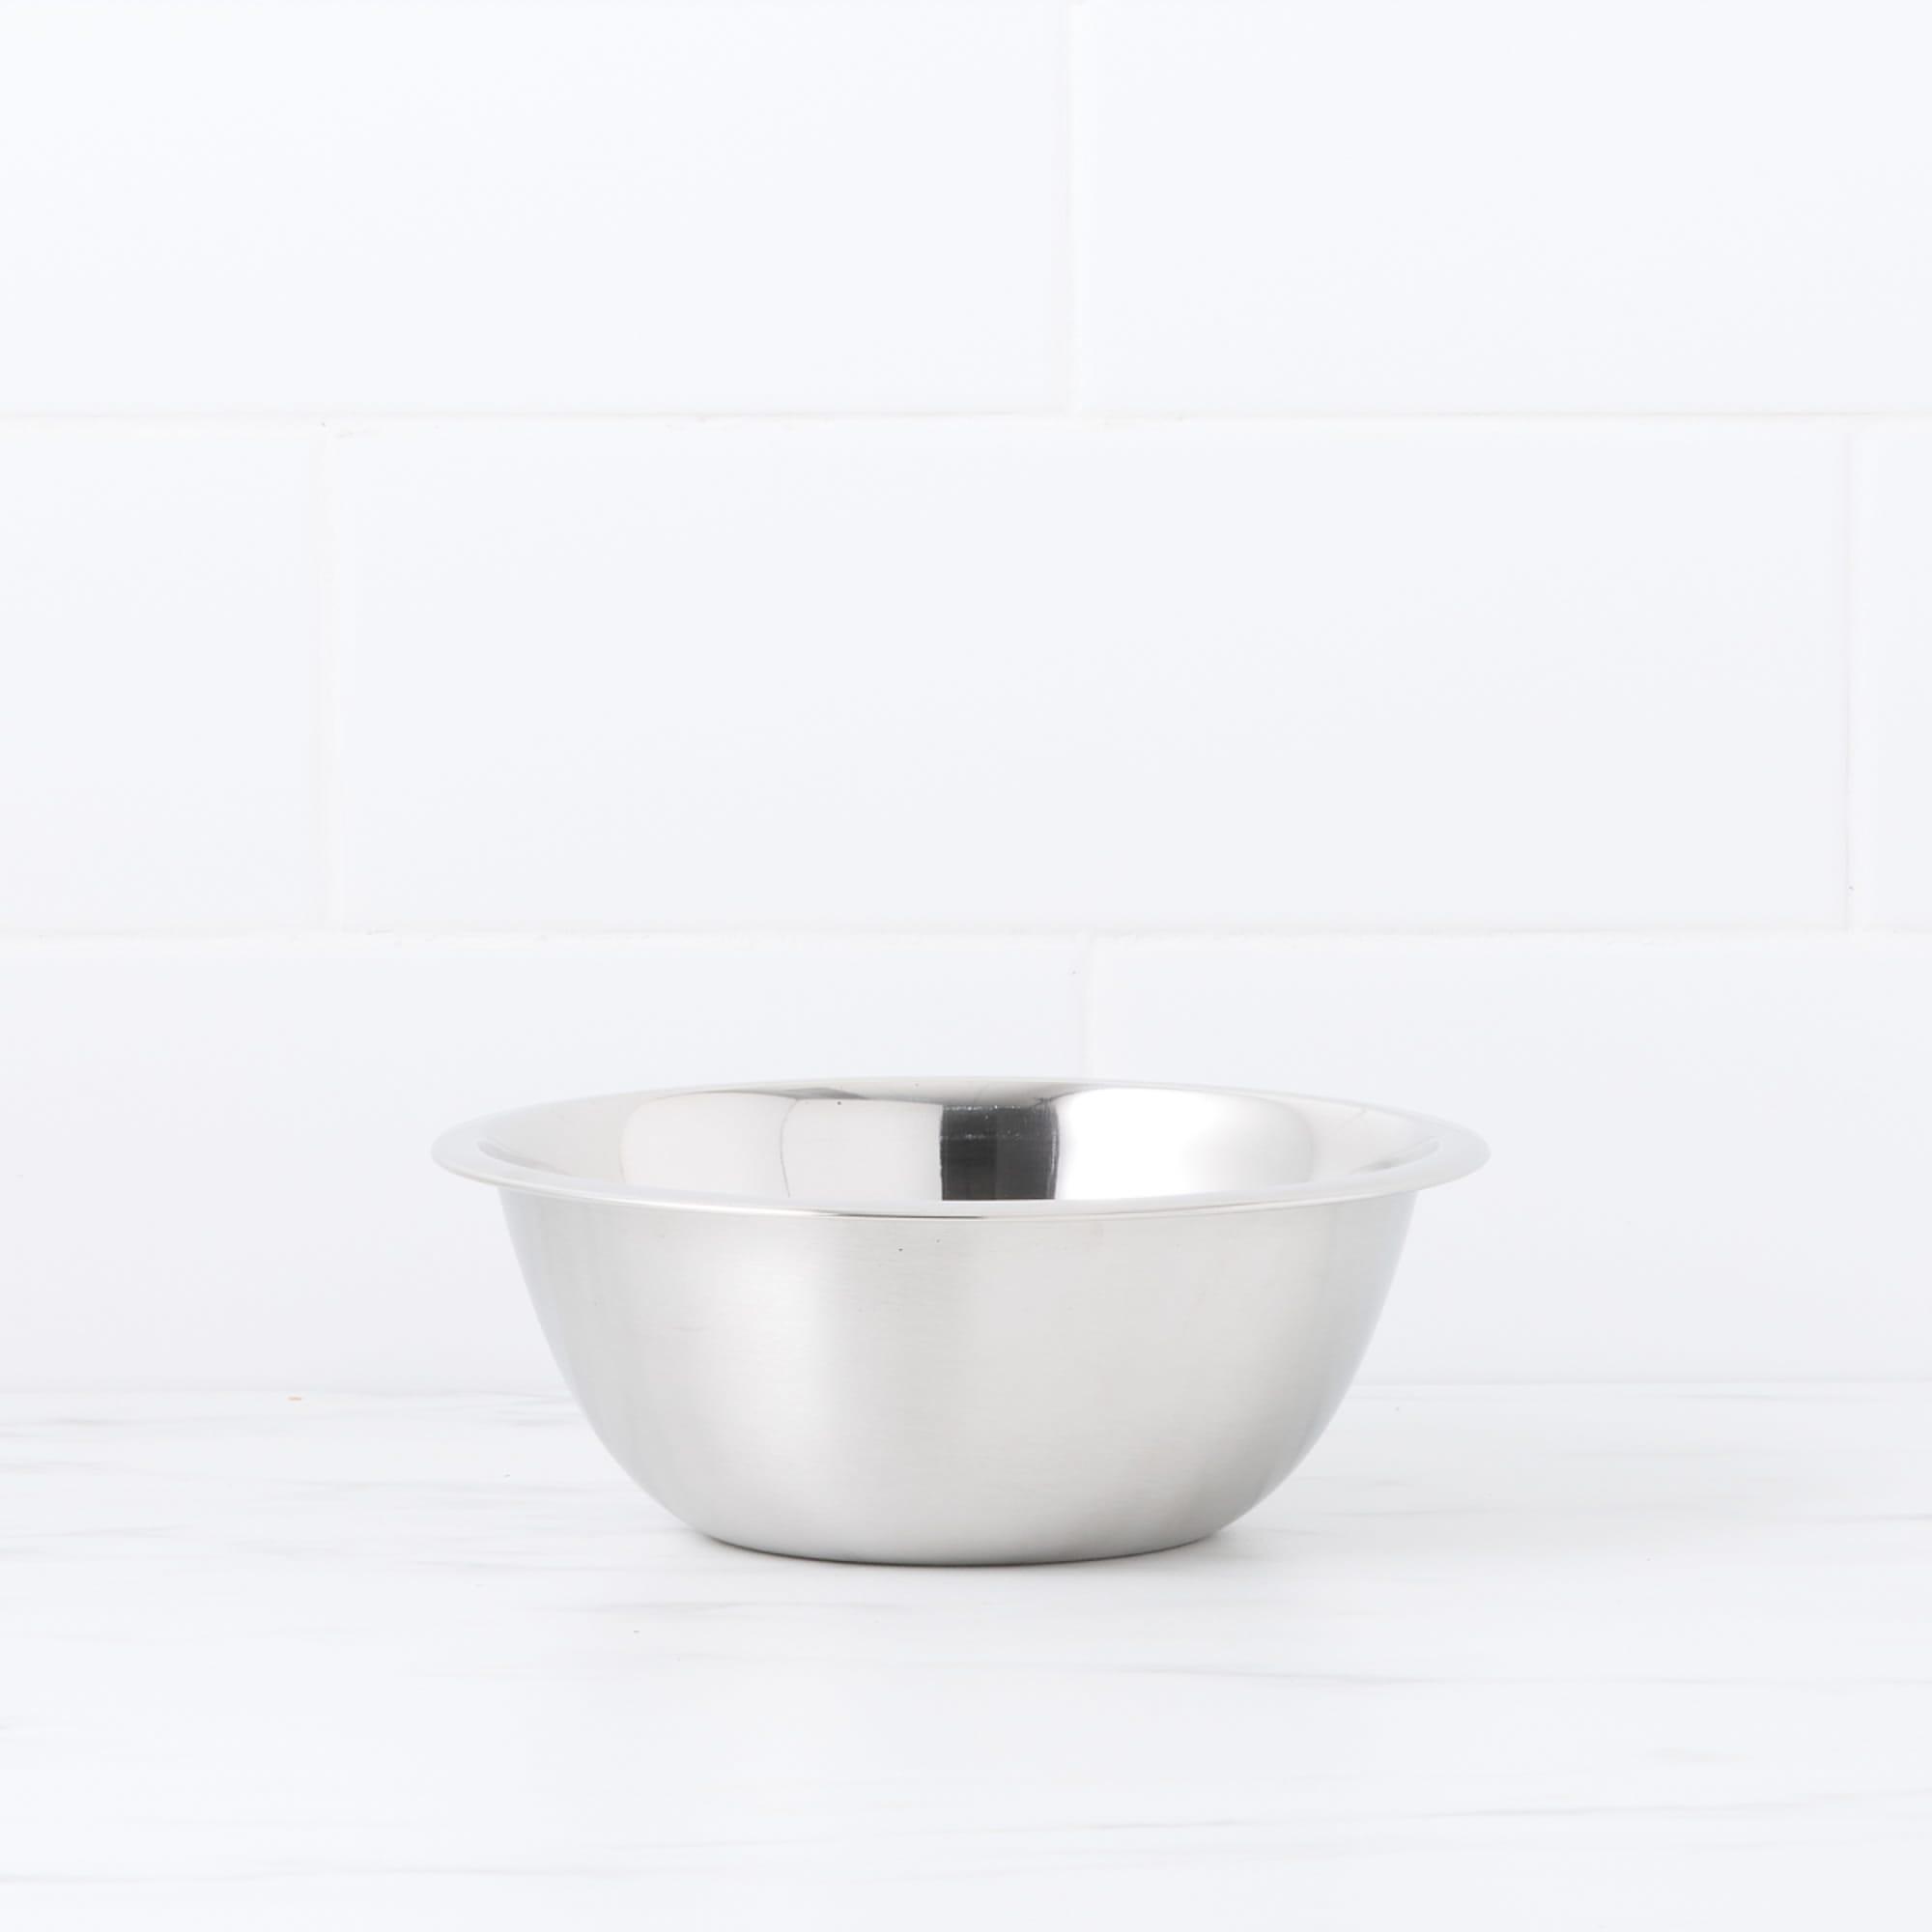 Kitchen Pro Mixwell Stainless Steel Mixing Bowl 20cm - 1.4L Image 1